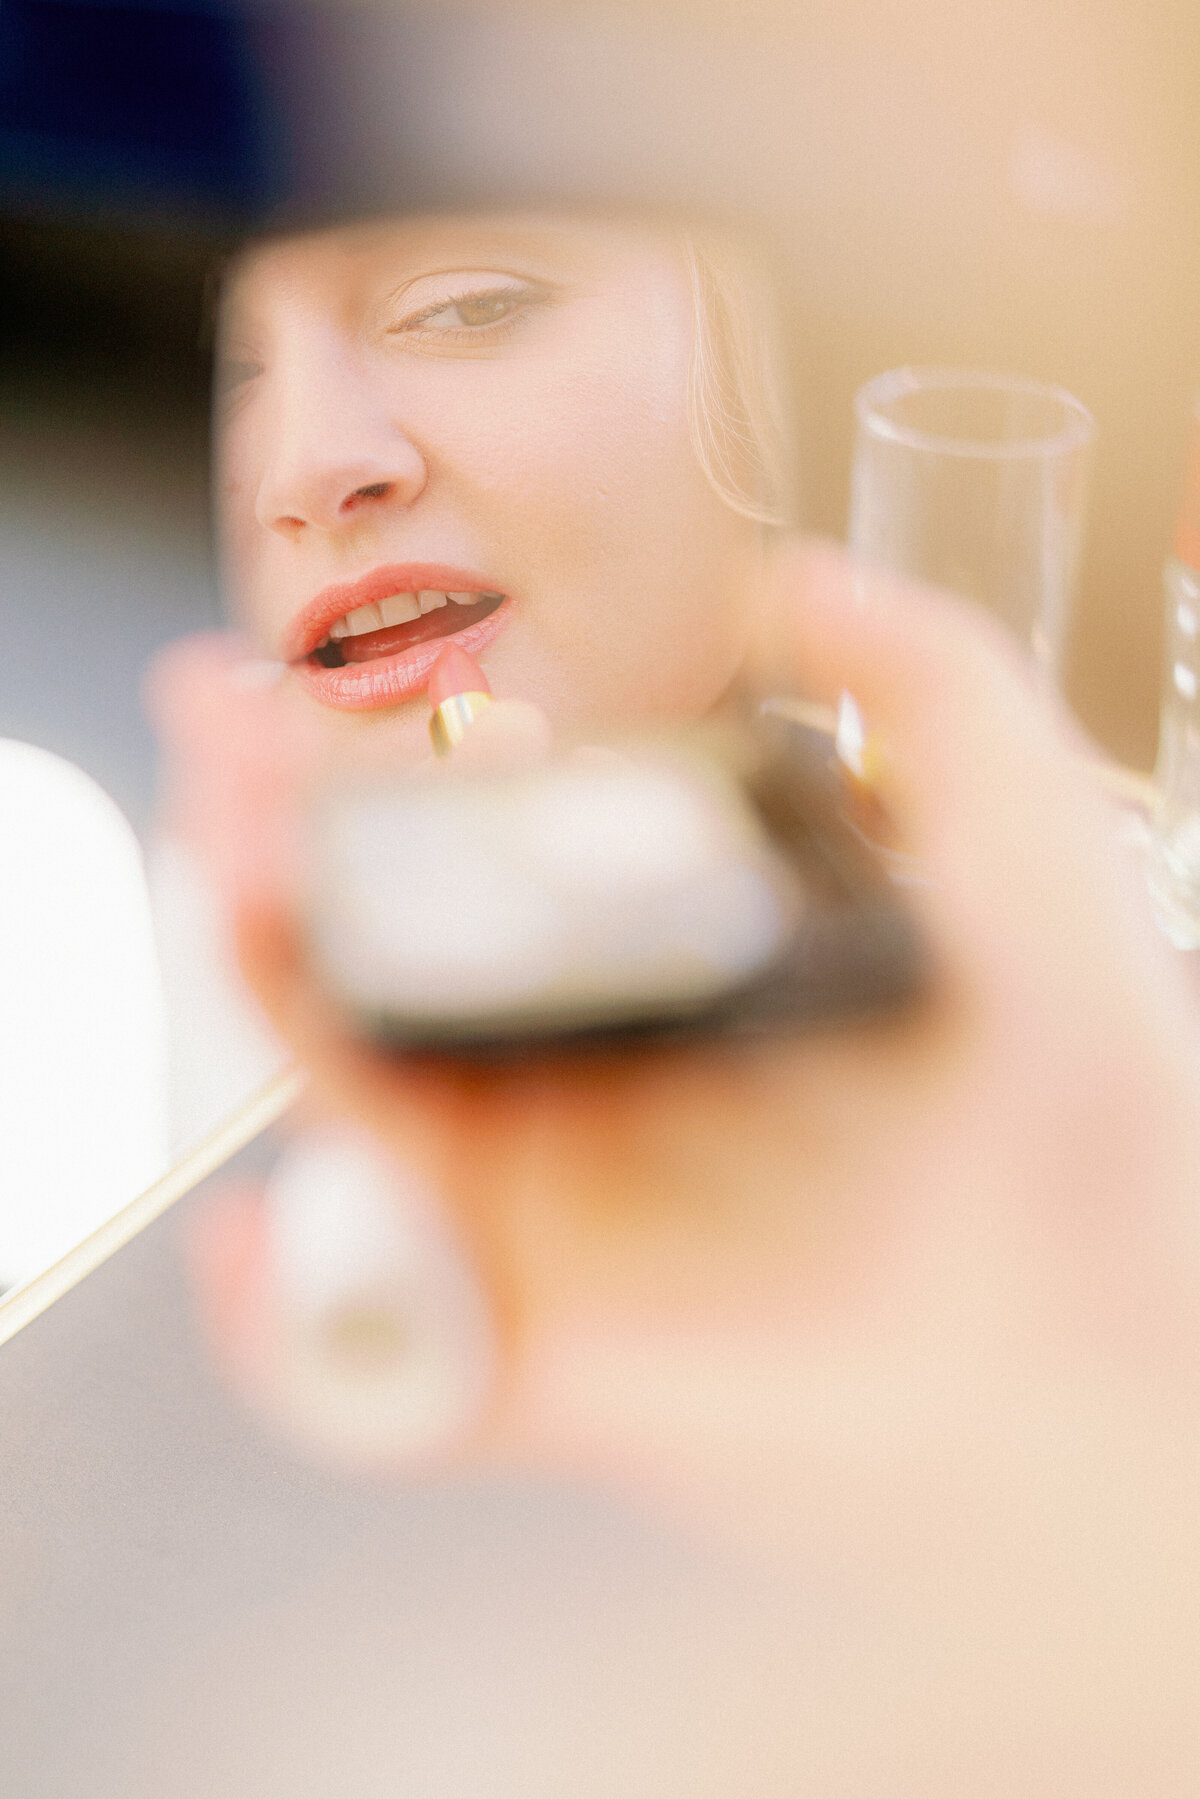 a woman putting lipstick on with a reflection of her in a mirror